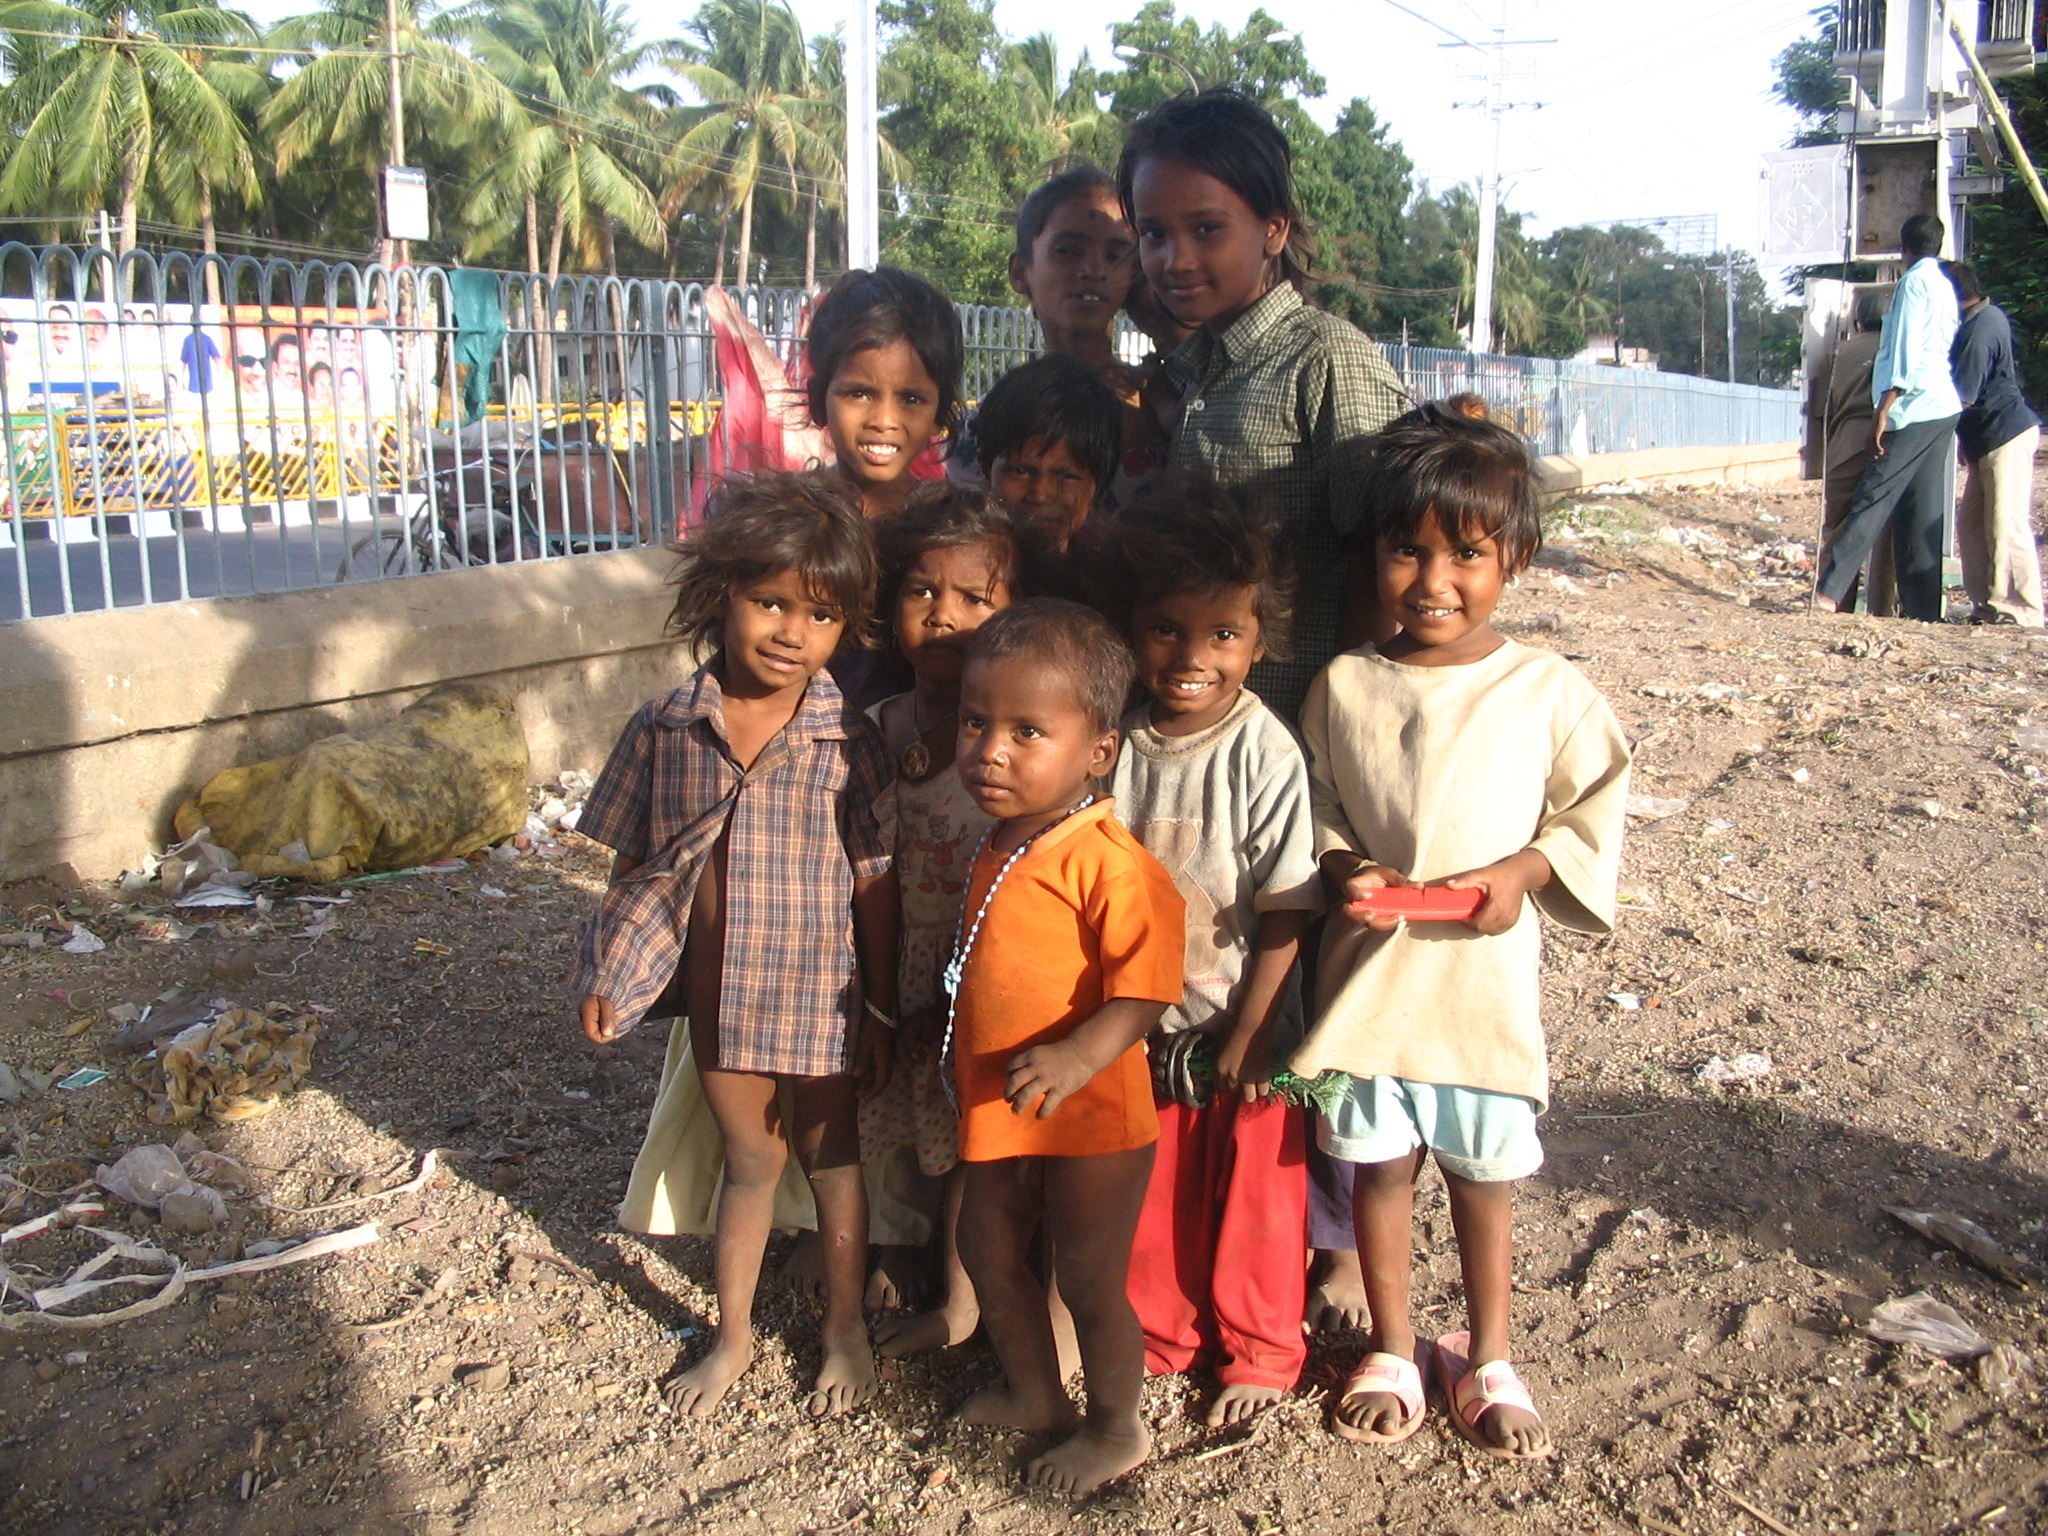 literature review on street children in india